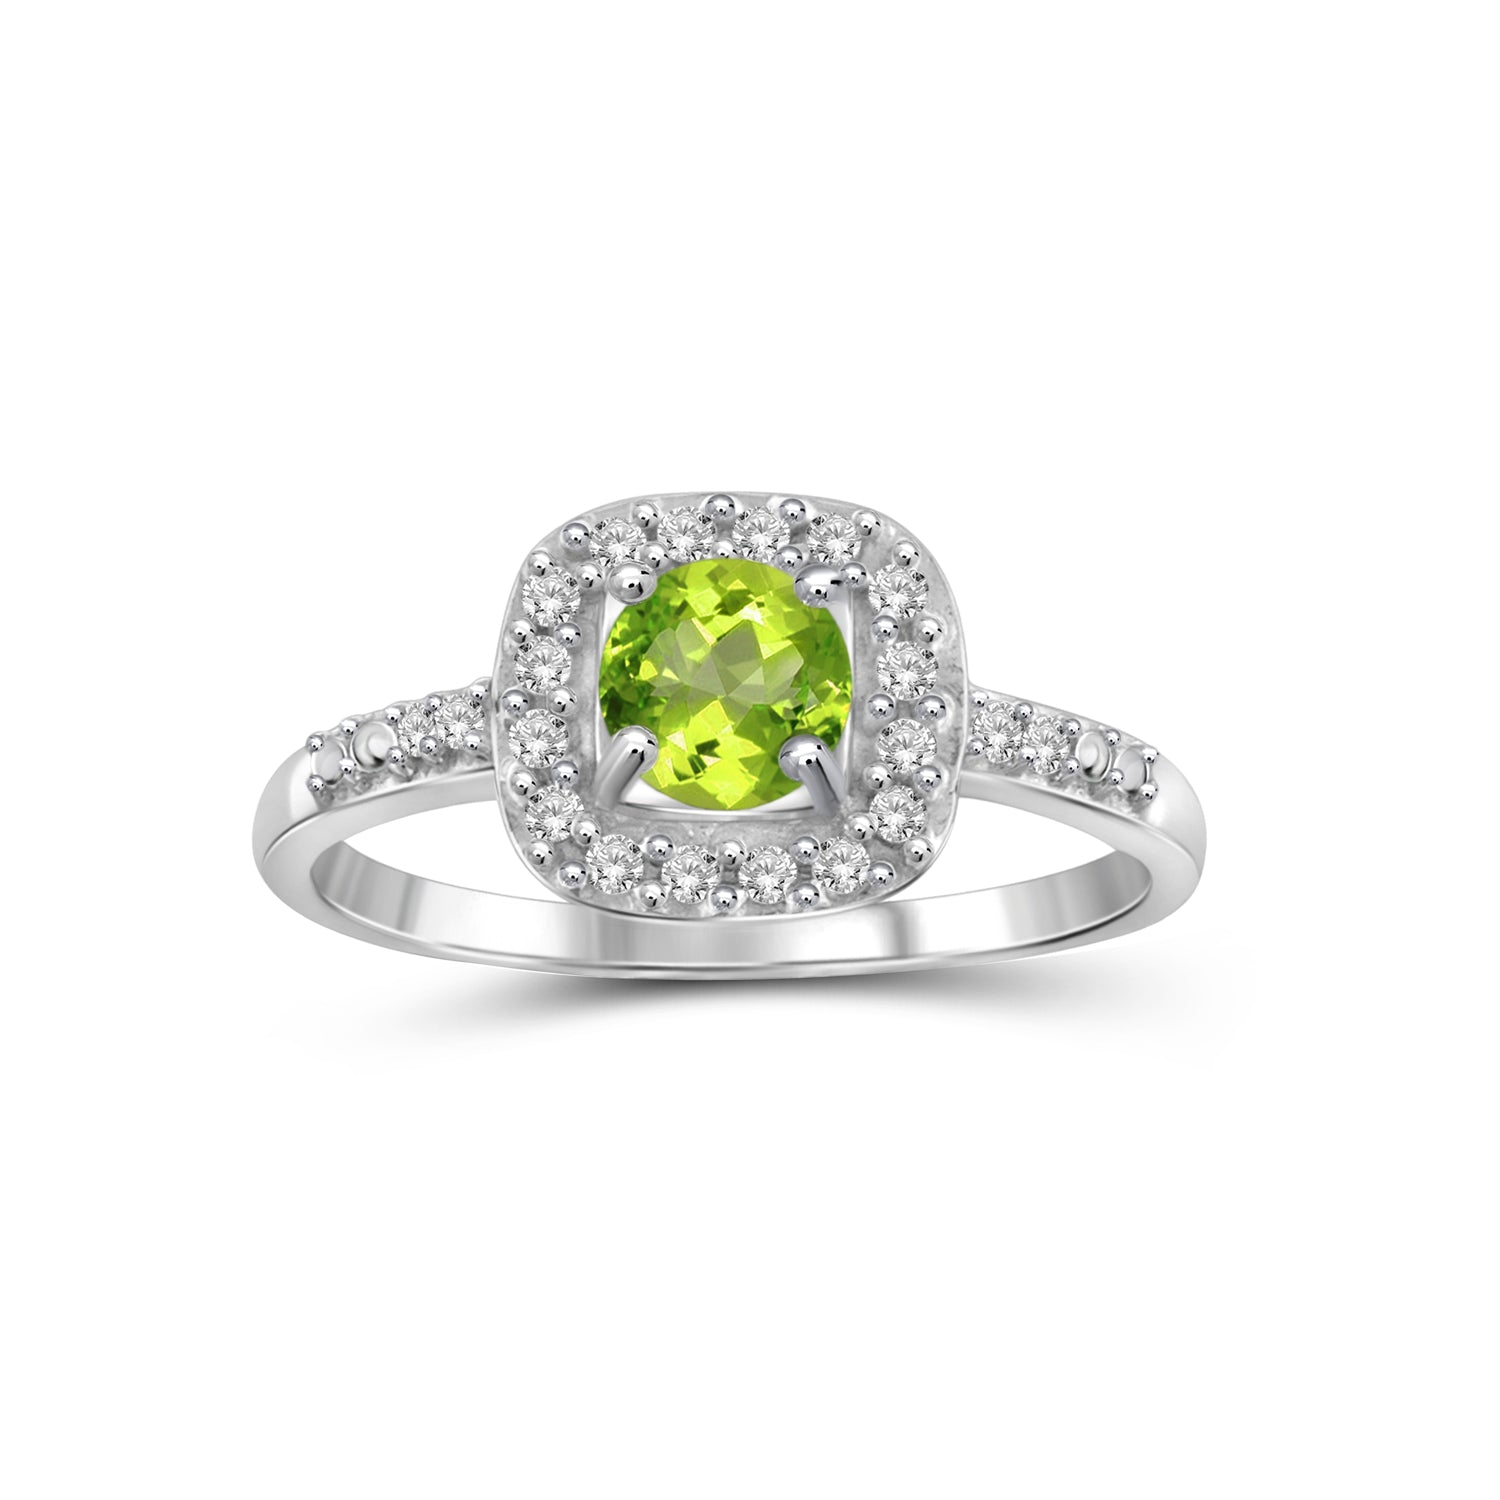 1/2 Carat T.G.W. Peridot And White Diamond Accent Sterling Silver Ring